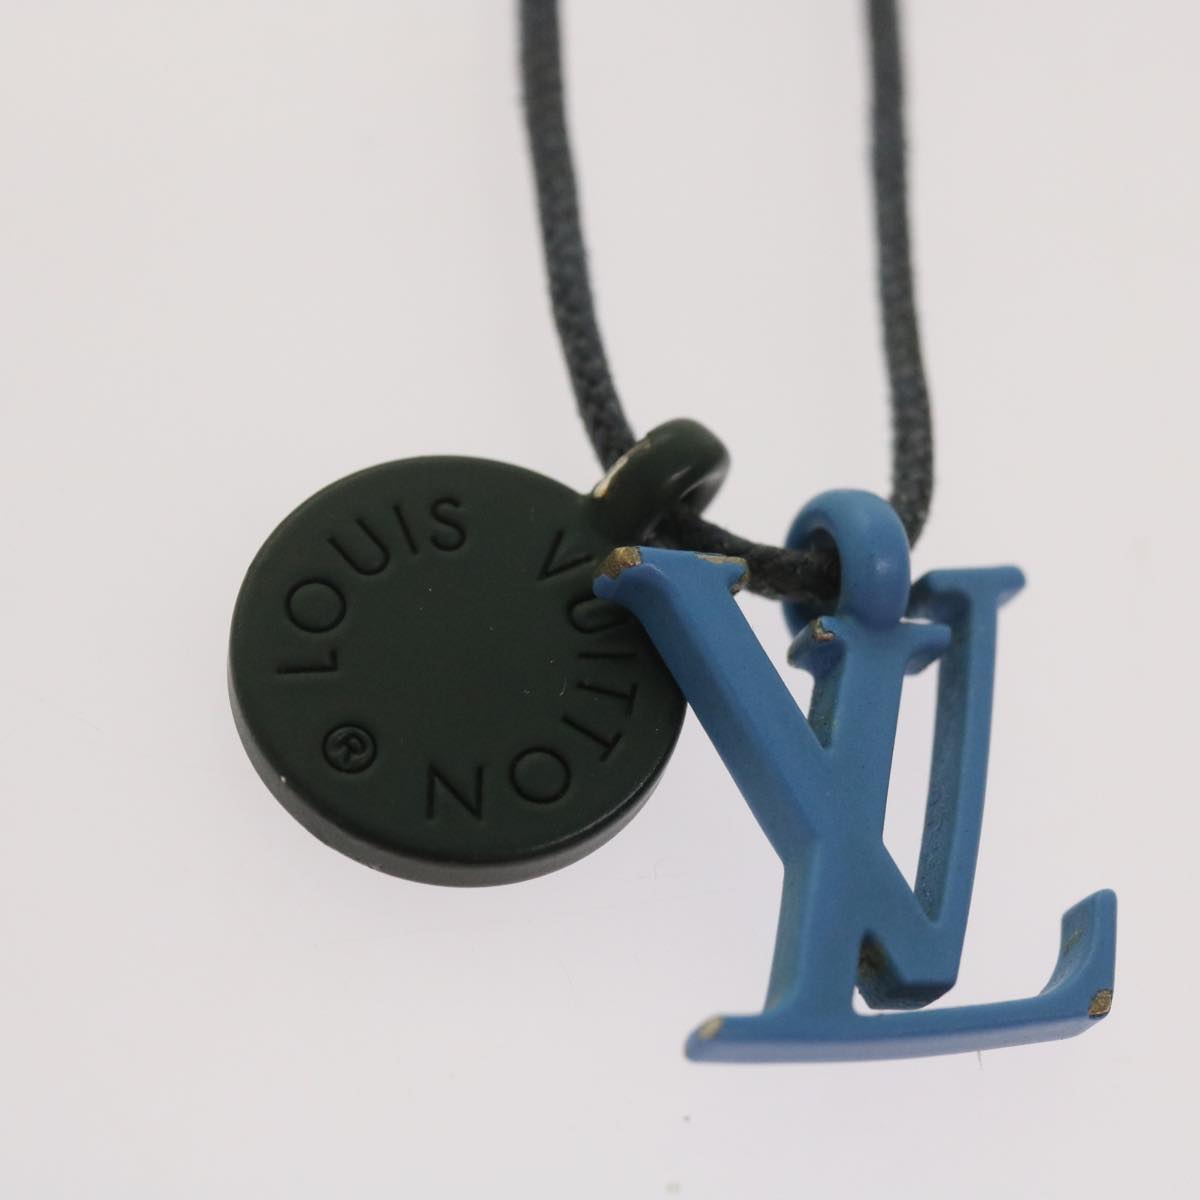 LOUIS VUITTON Collier Charms On The Go Necklace Blue M63648 LV Auth 69139